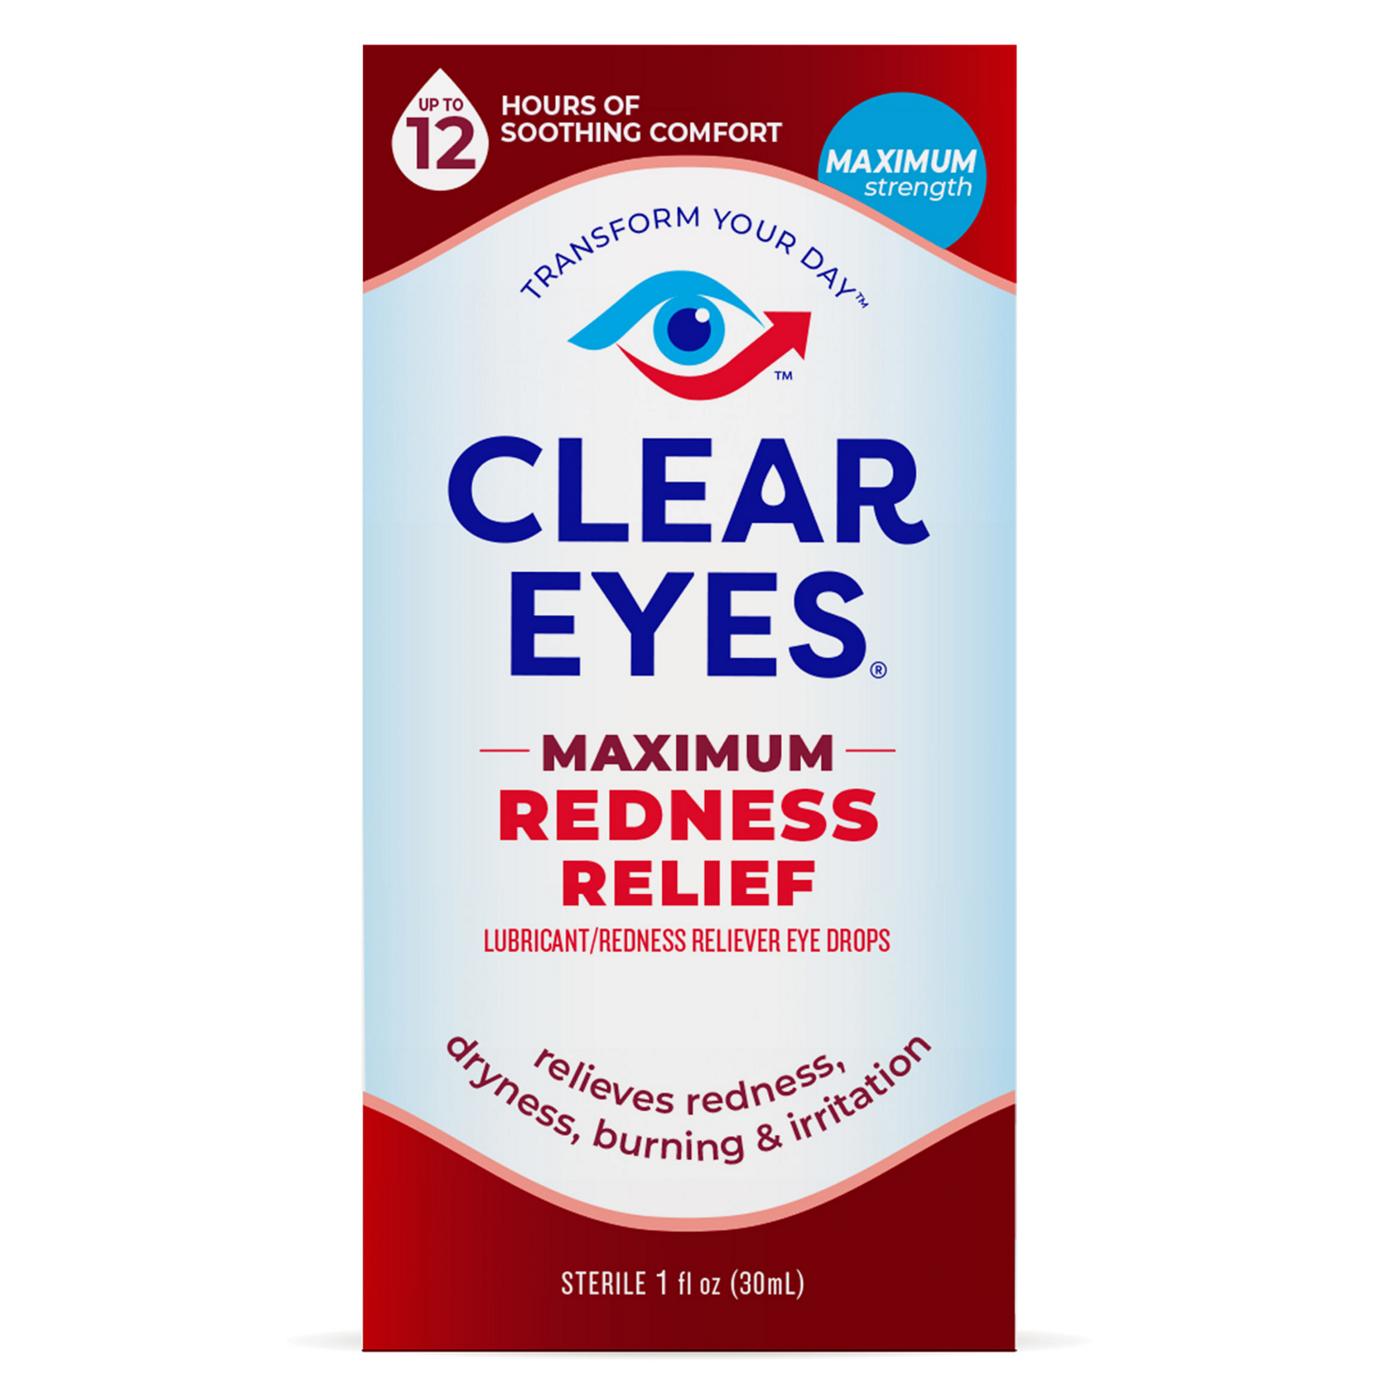 Clear Eyes Eye Drops, Max Redness Relief; image 1 of 3